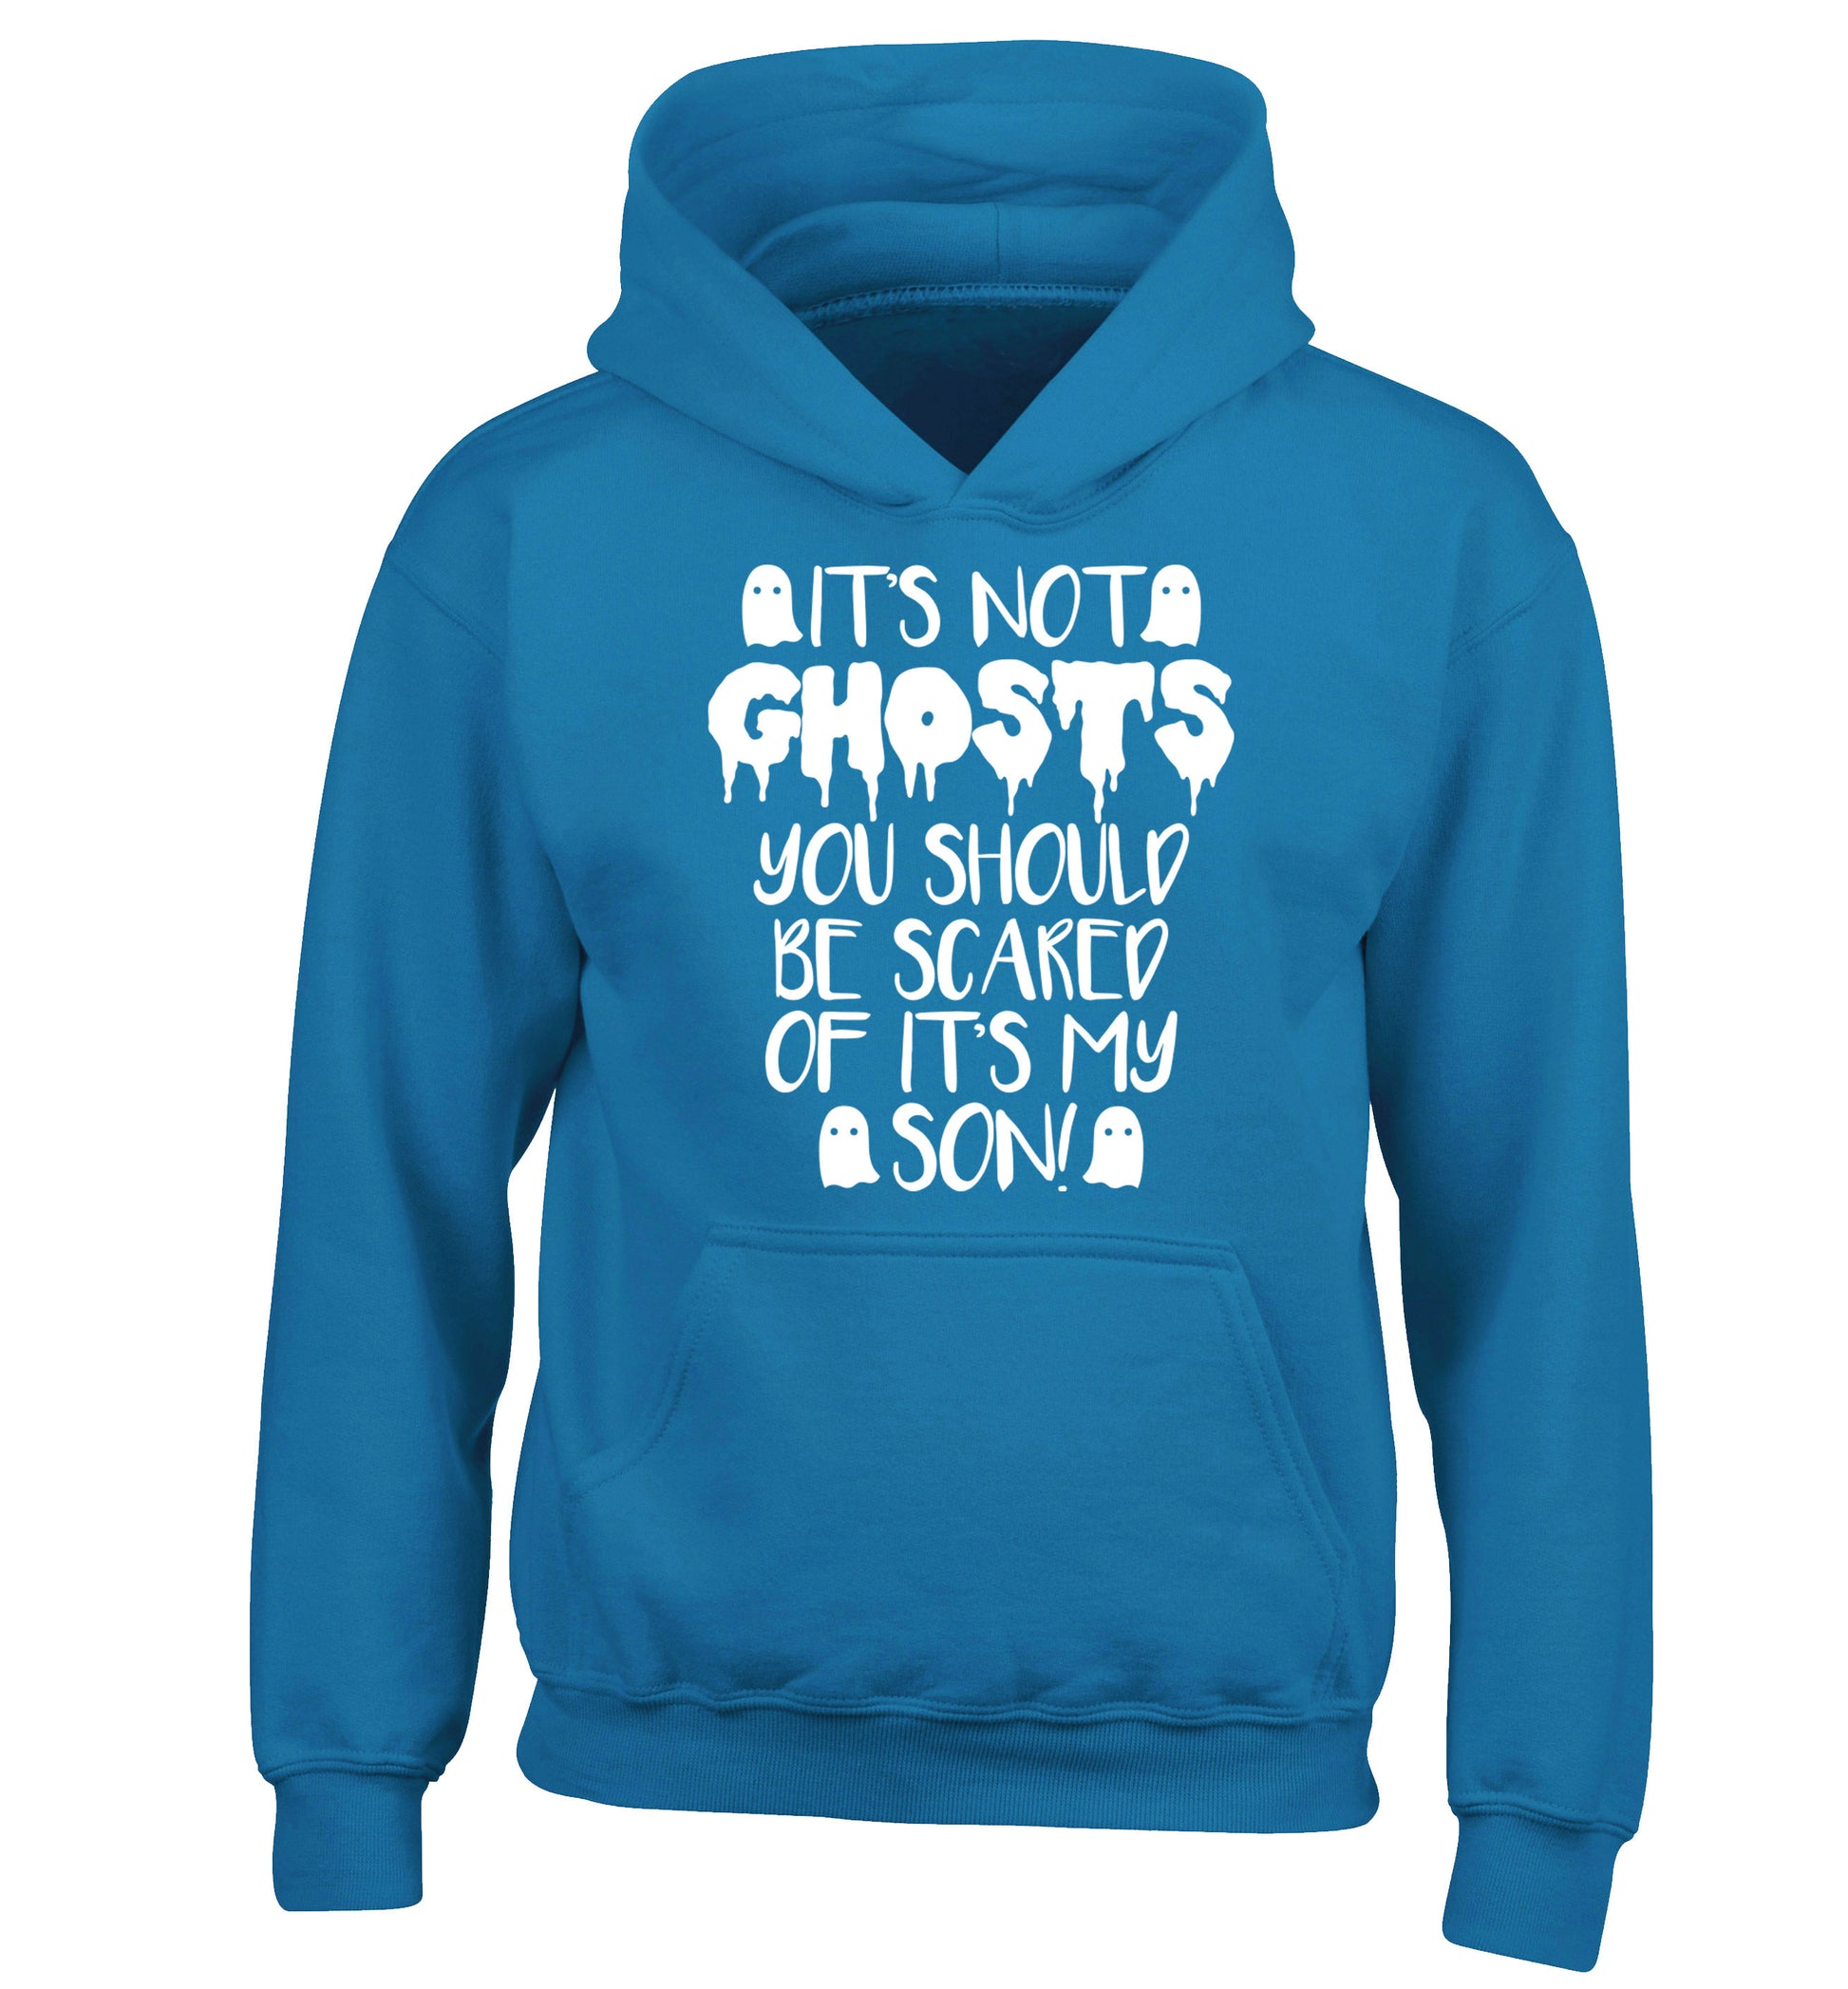 It's not ghosts you should be scared of it's my son! children's blue hoodie 12-14 Years